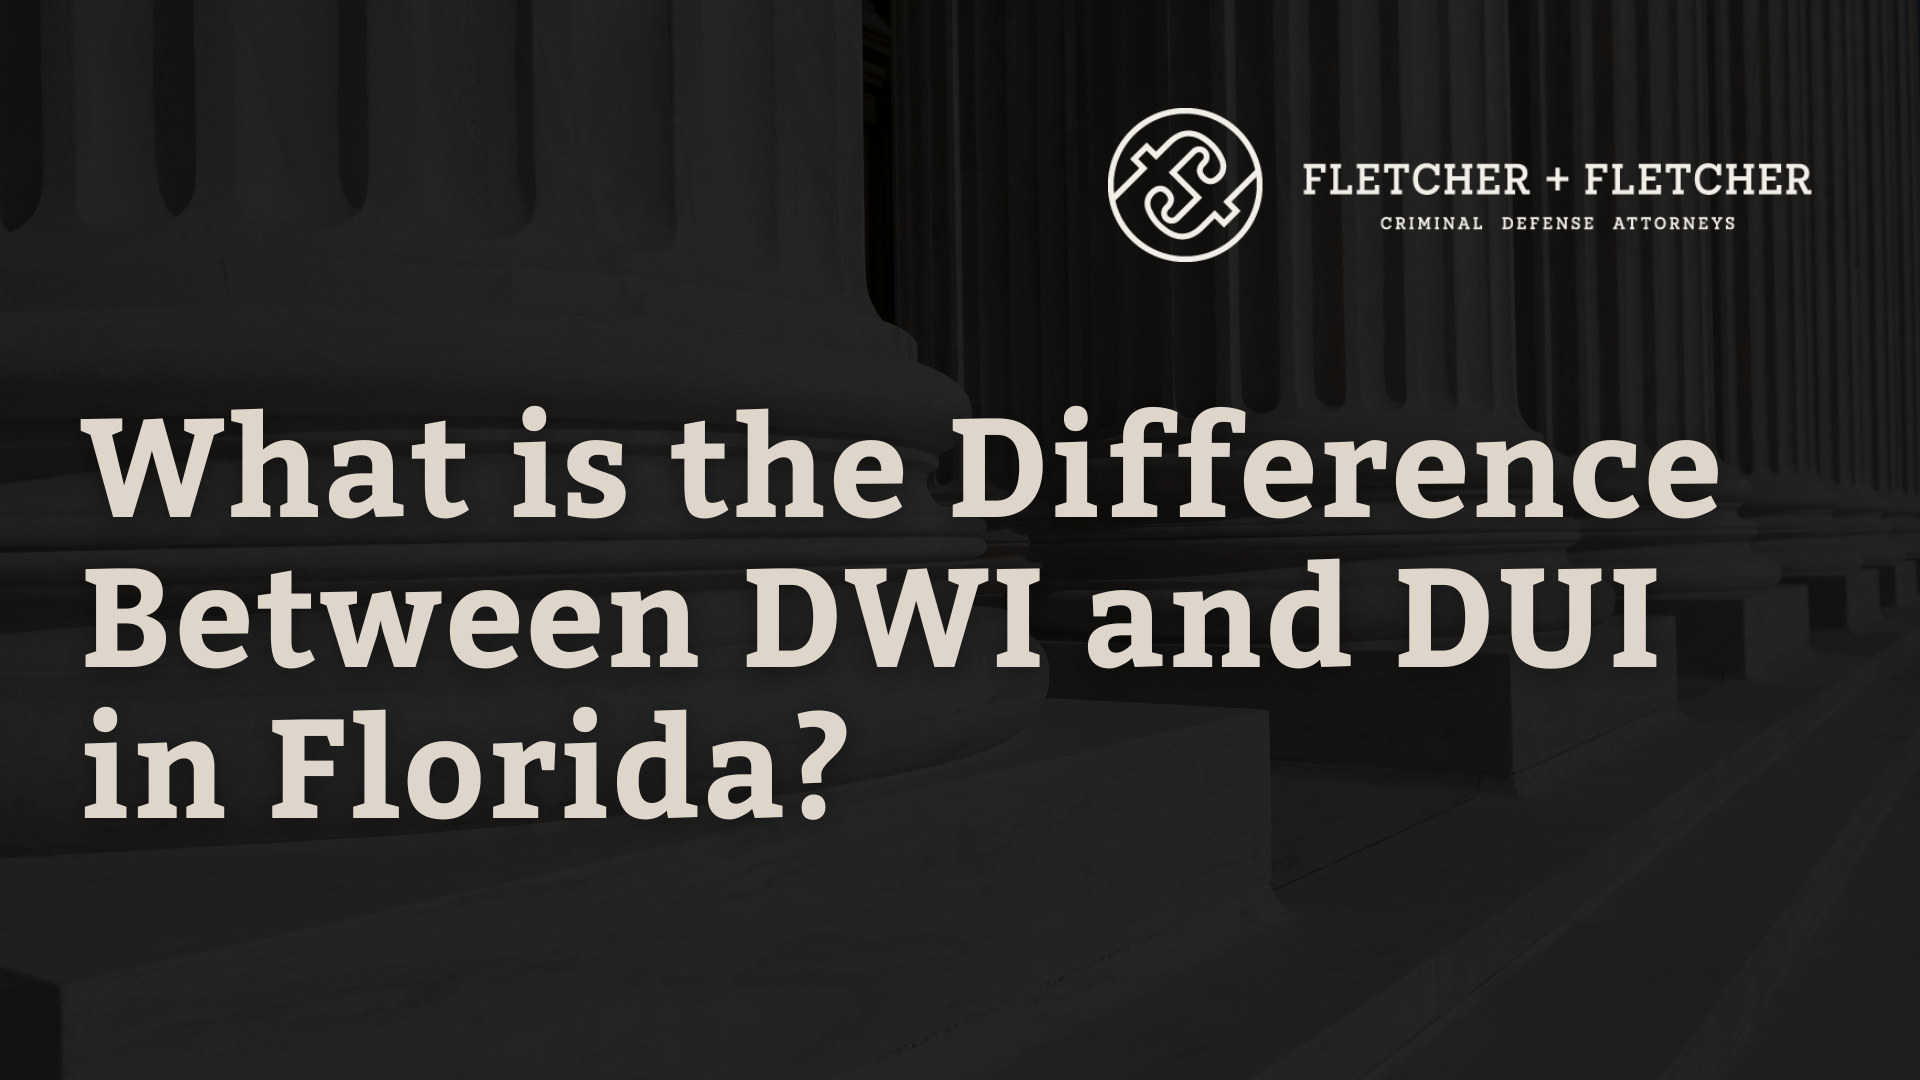 What is the Difference Between DWI and DUI in Florida?